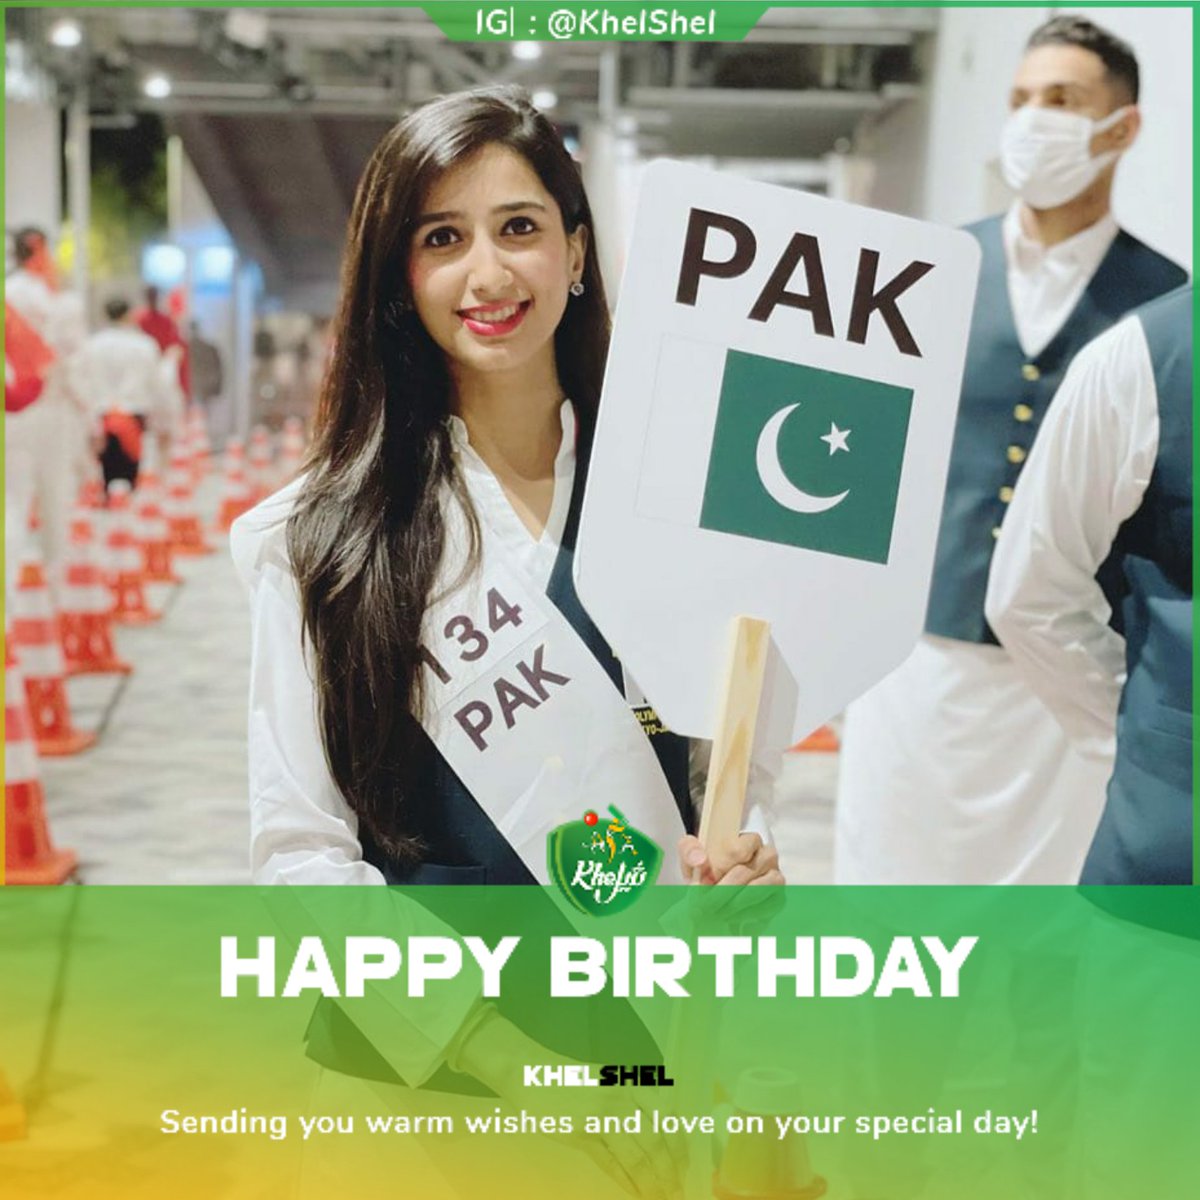 Pakistan's No.1 Badminton player, National Champion, First player to represent Pakistan in #TokyoOlympics. Happy Birthday to Mahoor Shahzad, may you have many more 🎂🥳 #Badminton | #Pakistan  | #MahoorShahzad | #Karachi | #Birthday